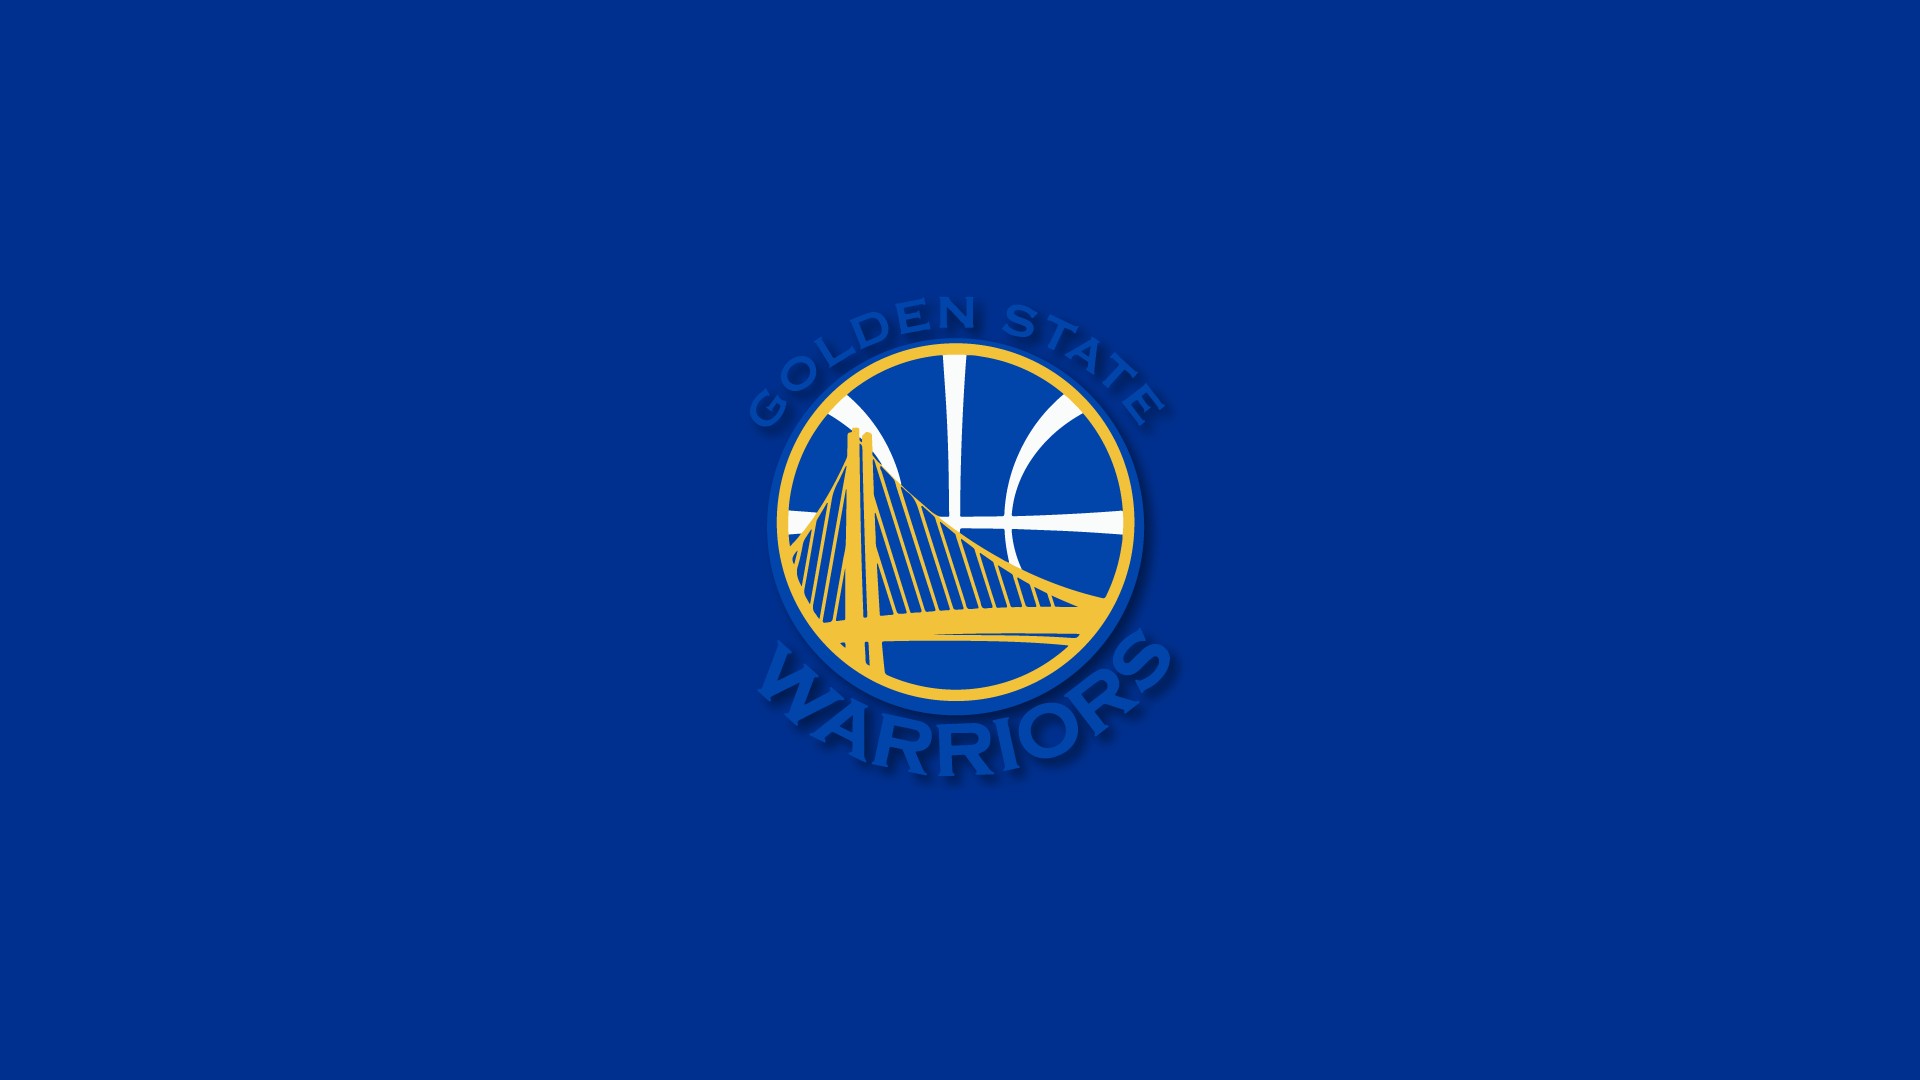 HD Backgrounds Golden State Warriors Logo with image dimensions 1920x1080 pixel. You can make this wallpaper for your Desktop Computer Backgrounds, Windows or Mac Screensavers, iPhone Lock screen, Tablet or Android and another Mobile Phone device